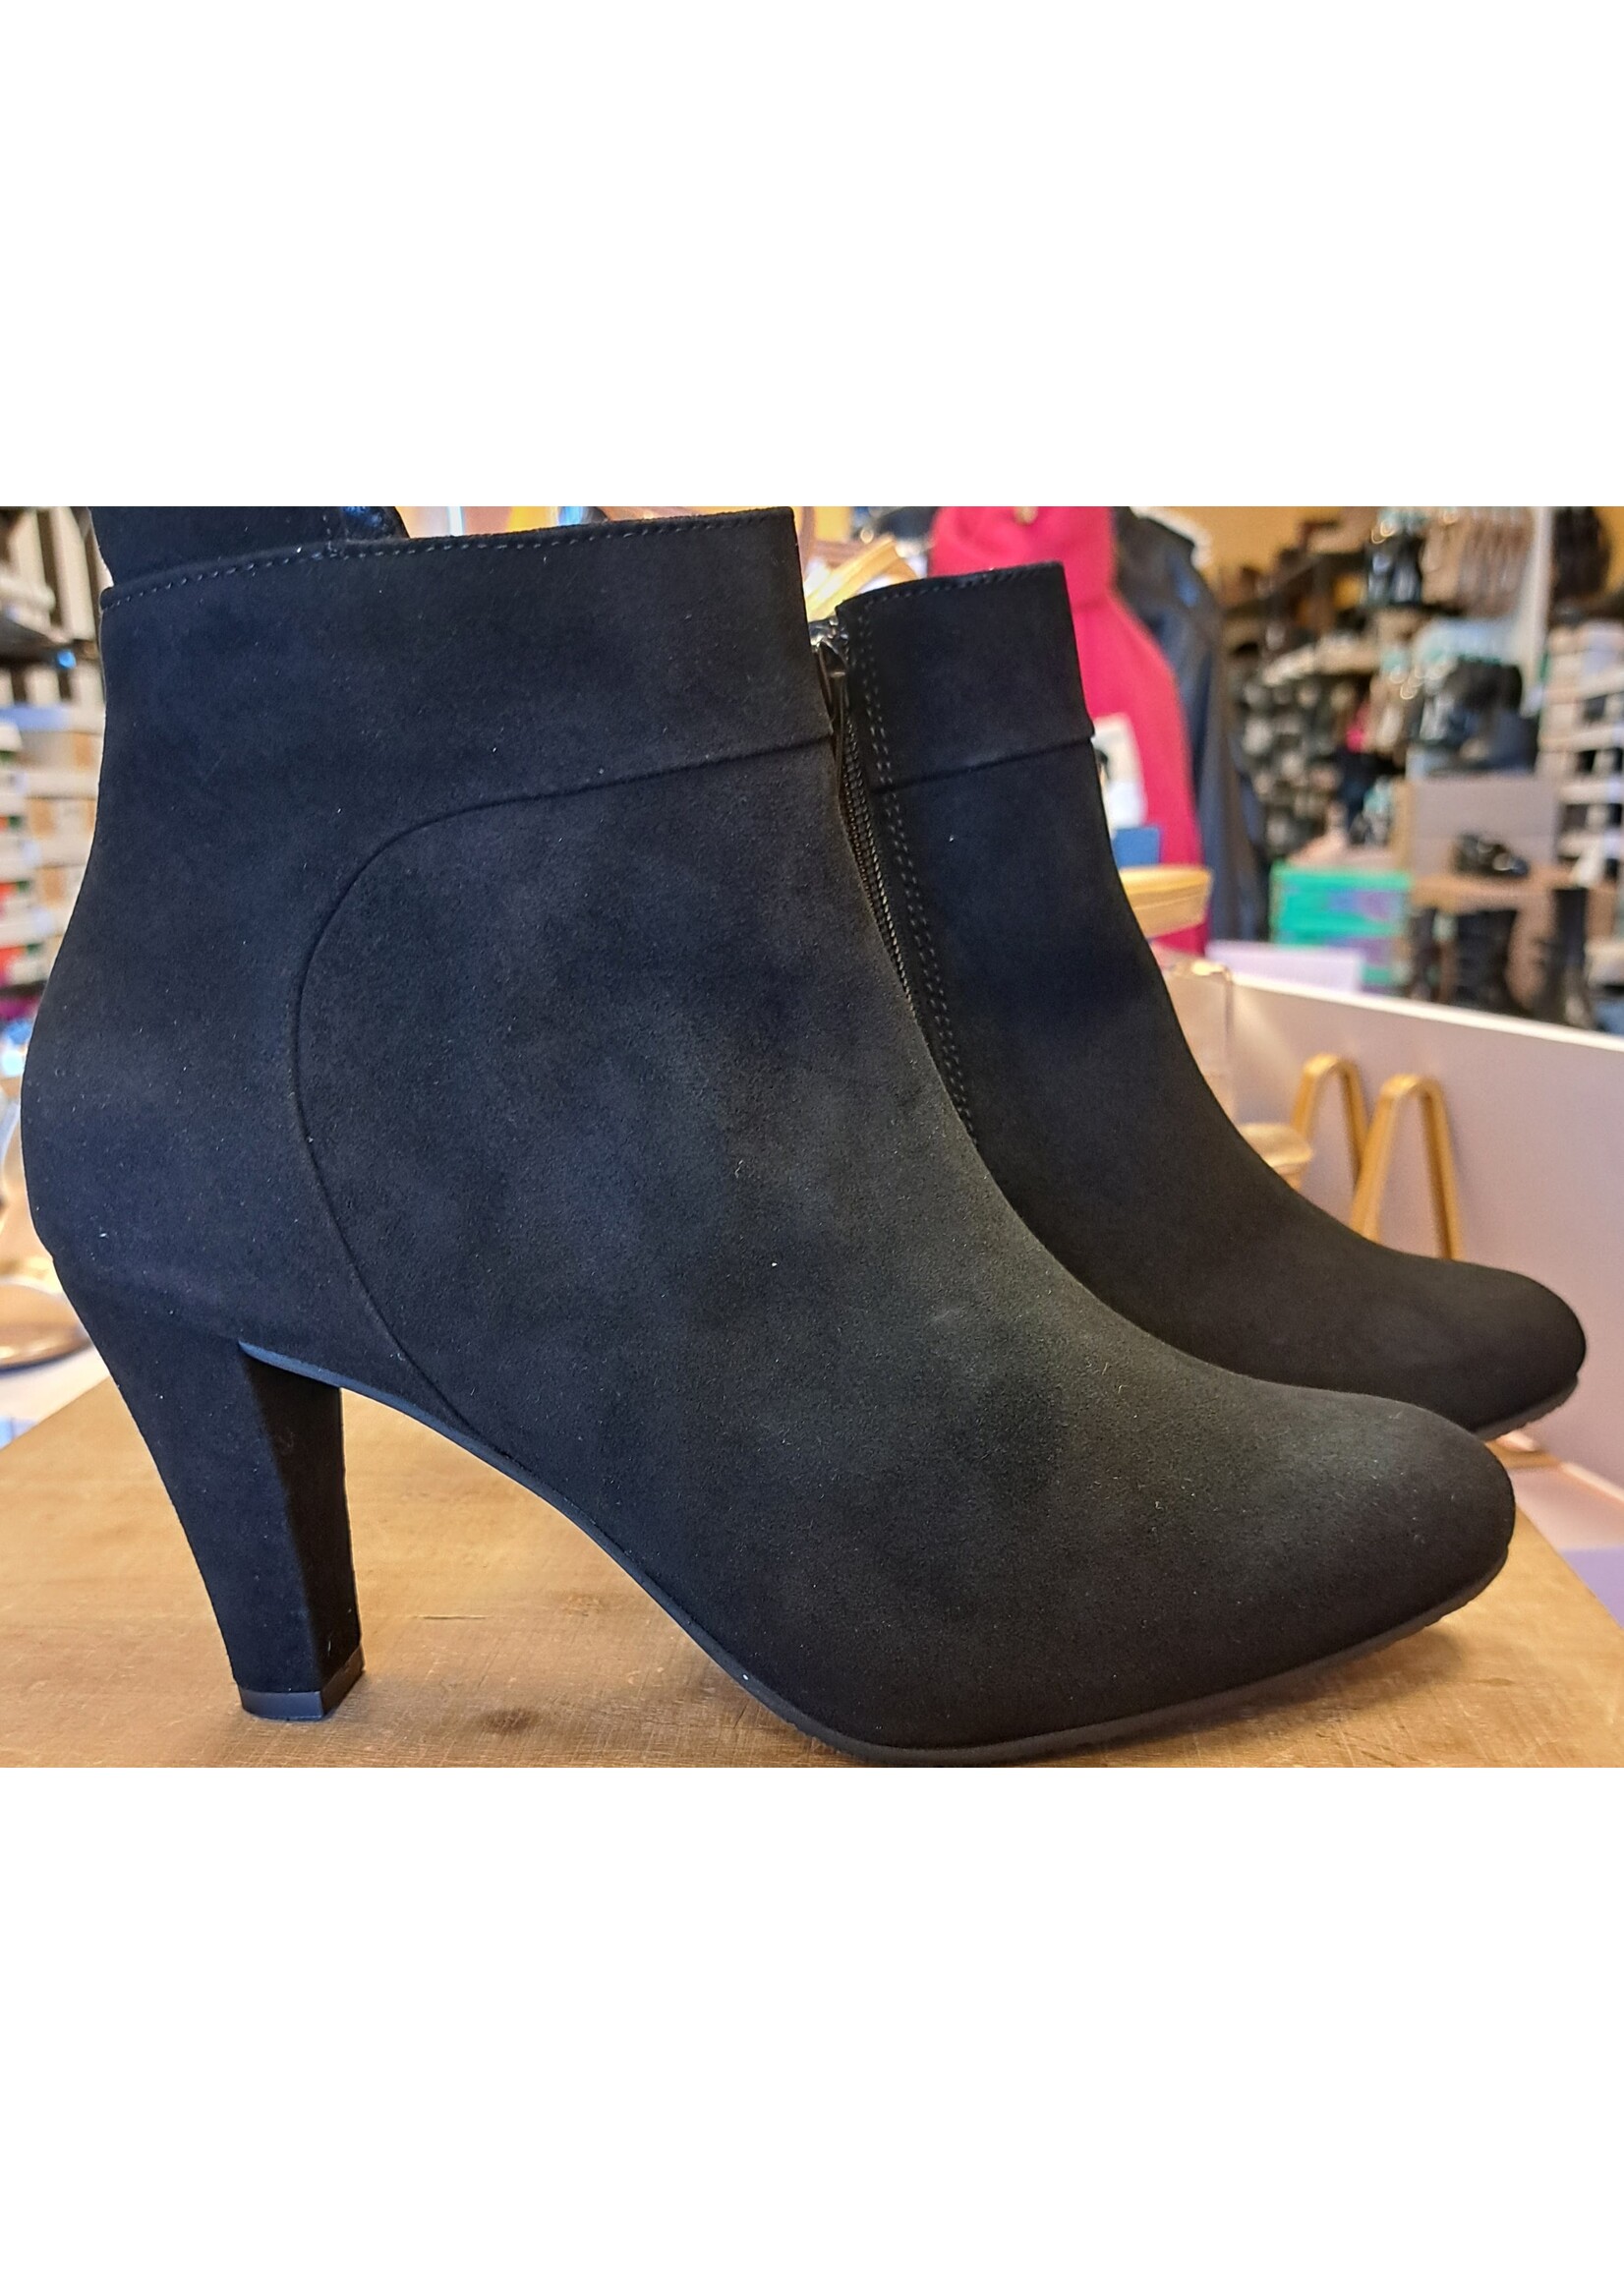 Eric Michael Didi Dress Boot in Black Suede by Eric Michael 25% Off